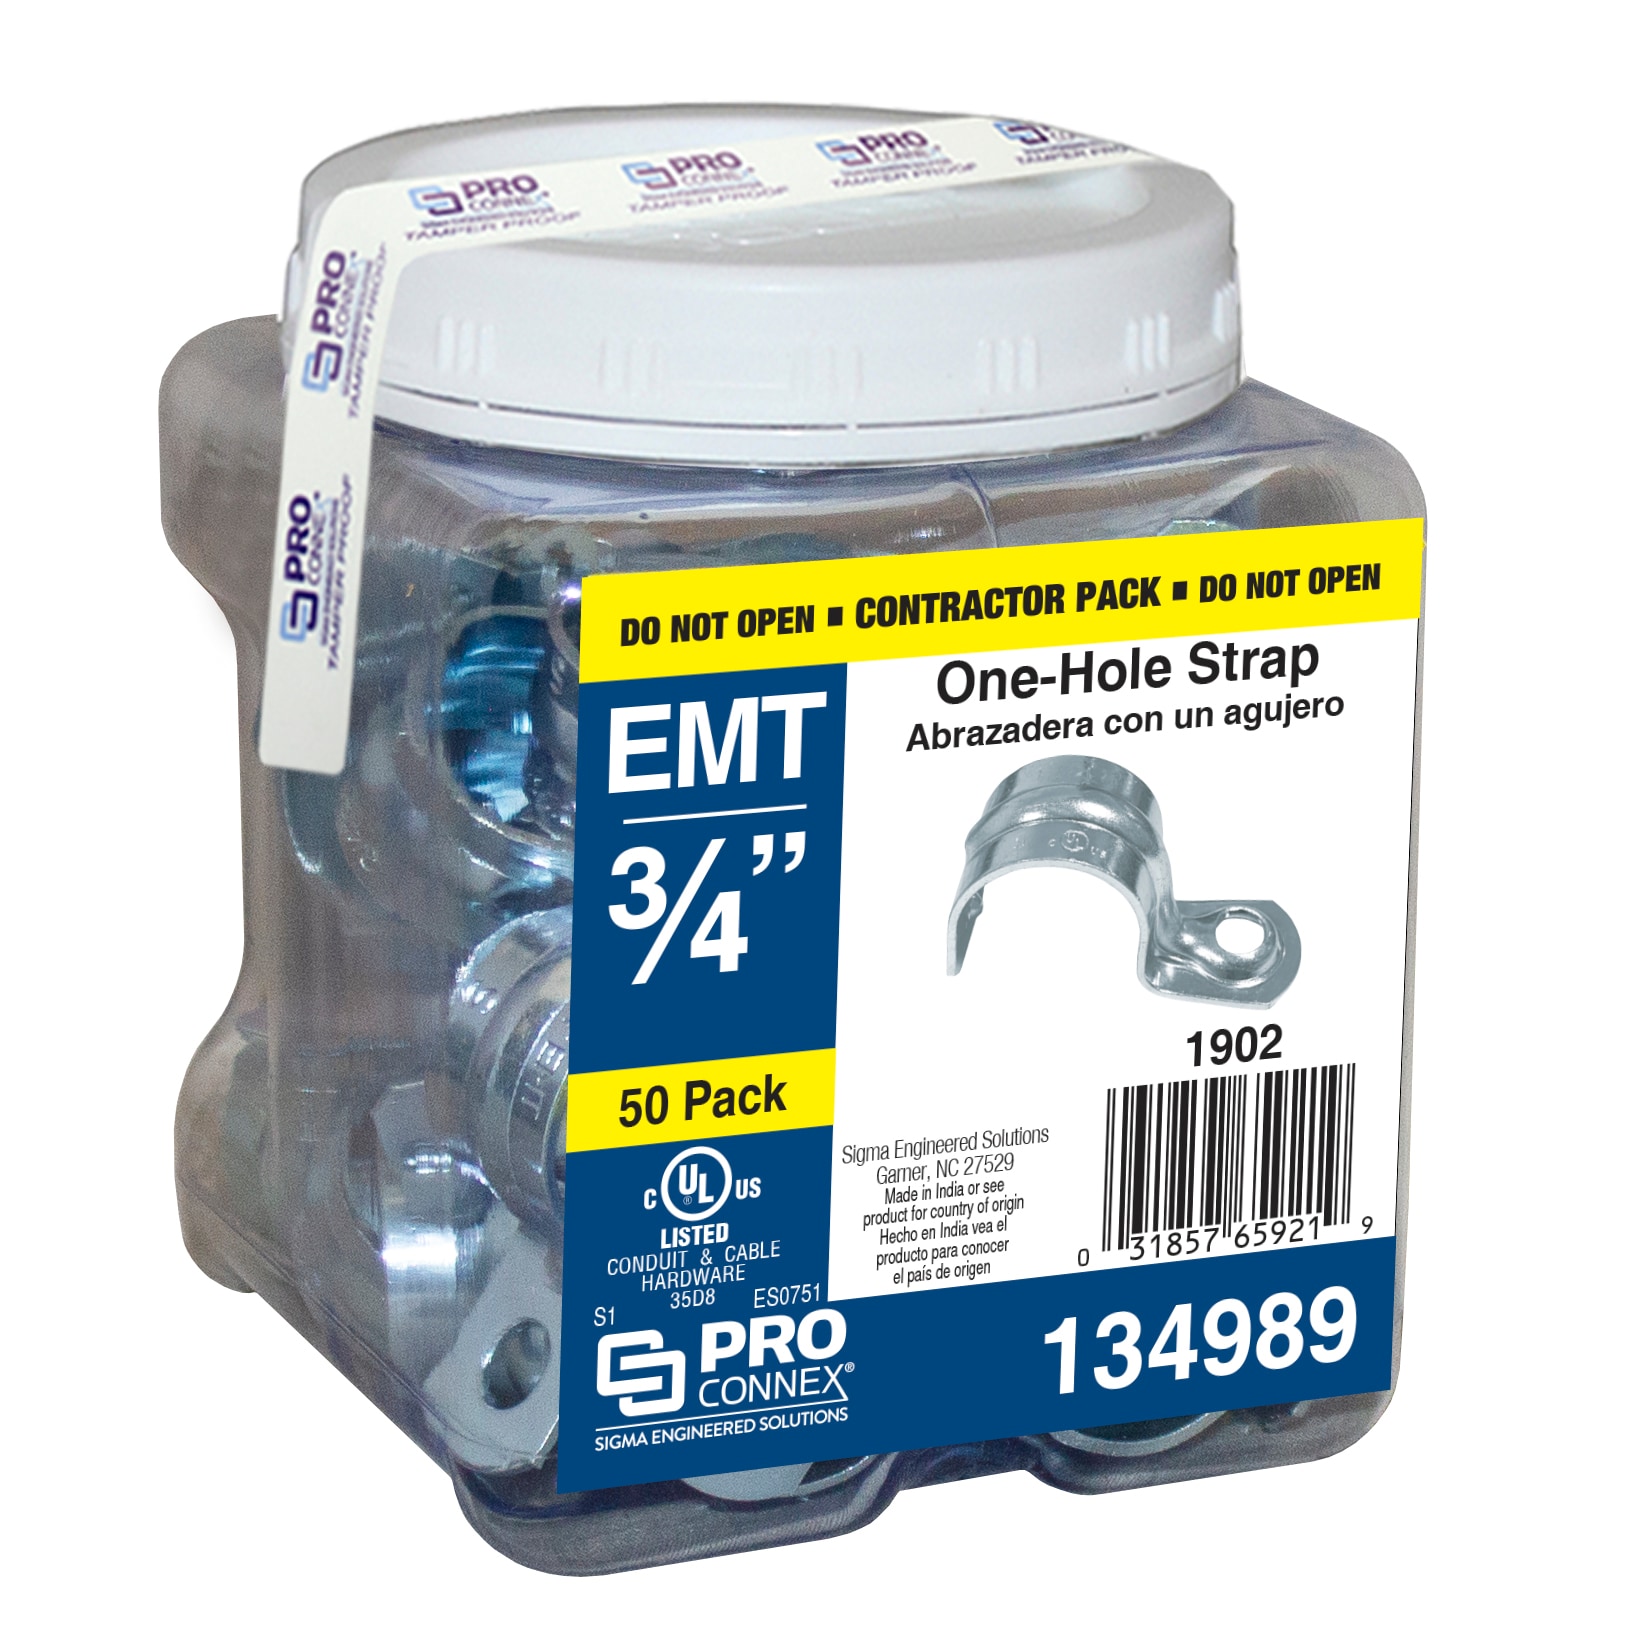 Sigma ProConnex 1-1/2-in Electrical (EMT) Zinc-plated Steel One